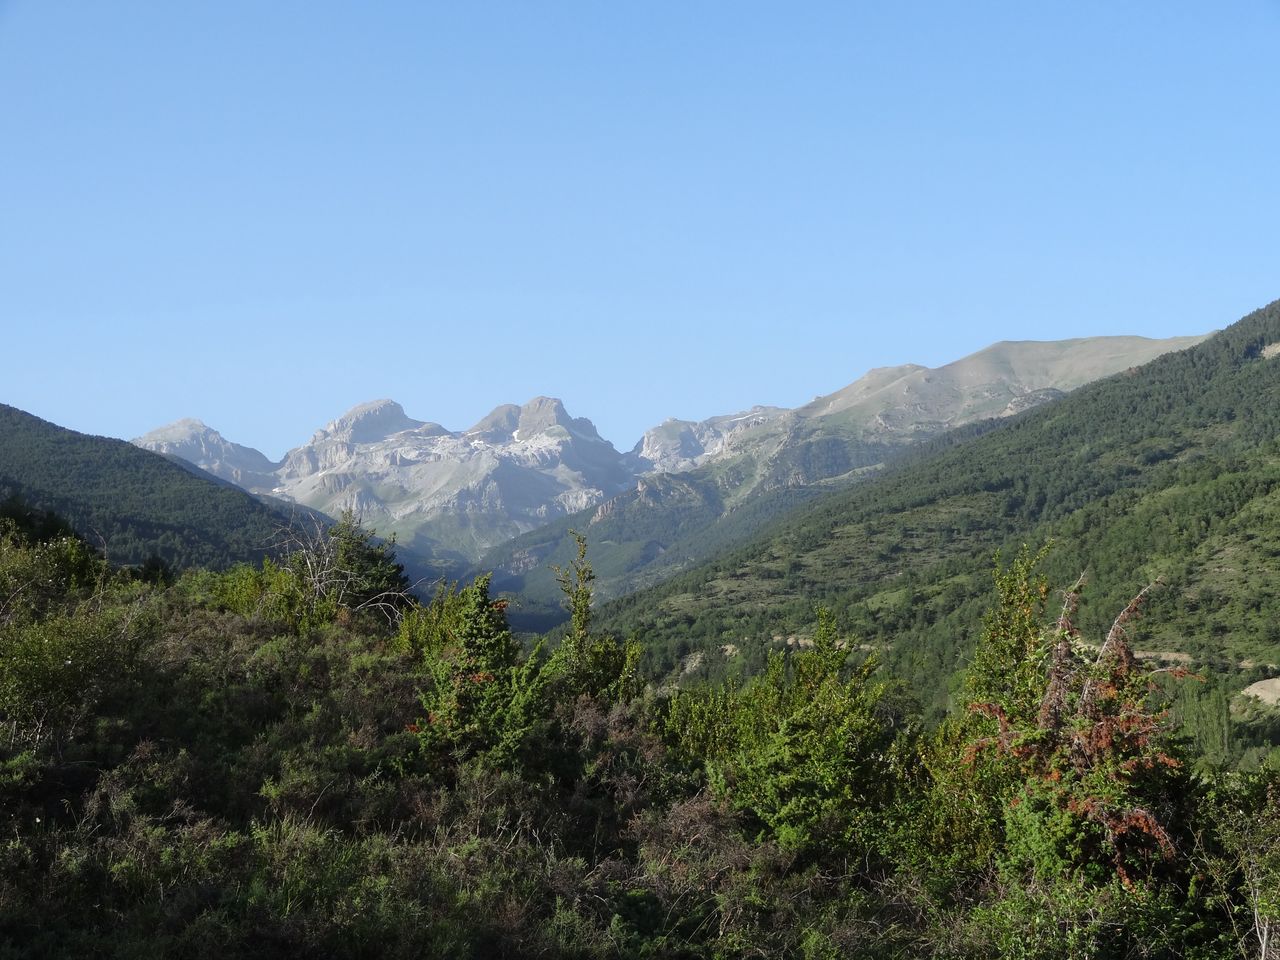 British tourist found dead after mountain rescue in Pyrenees